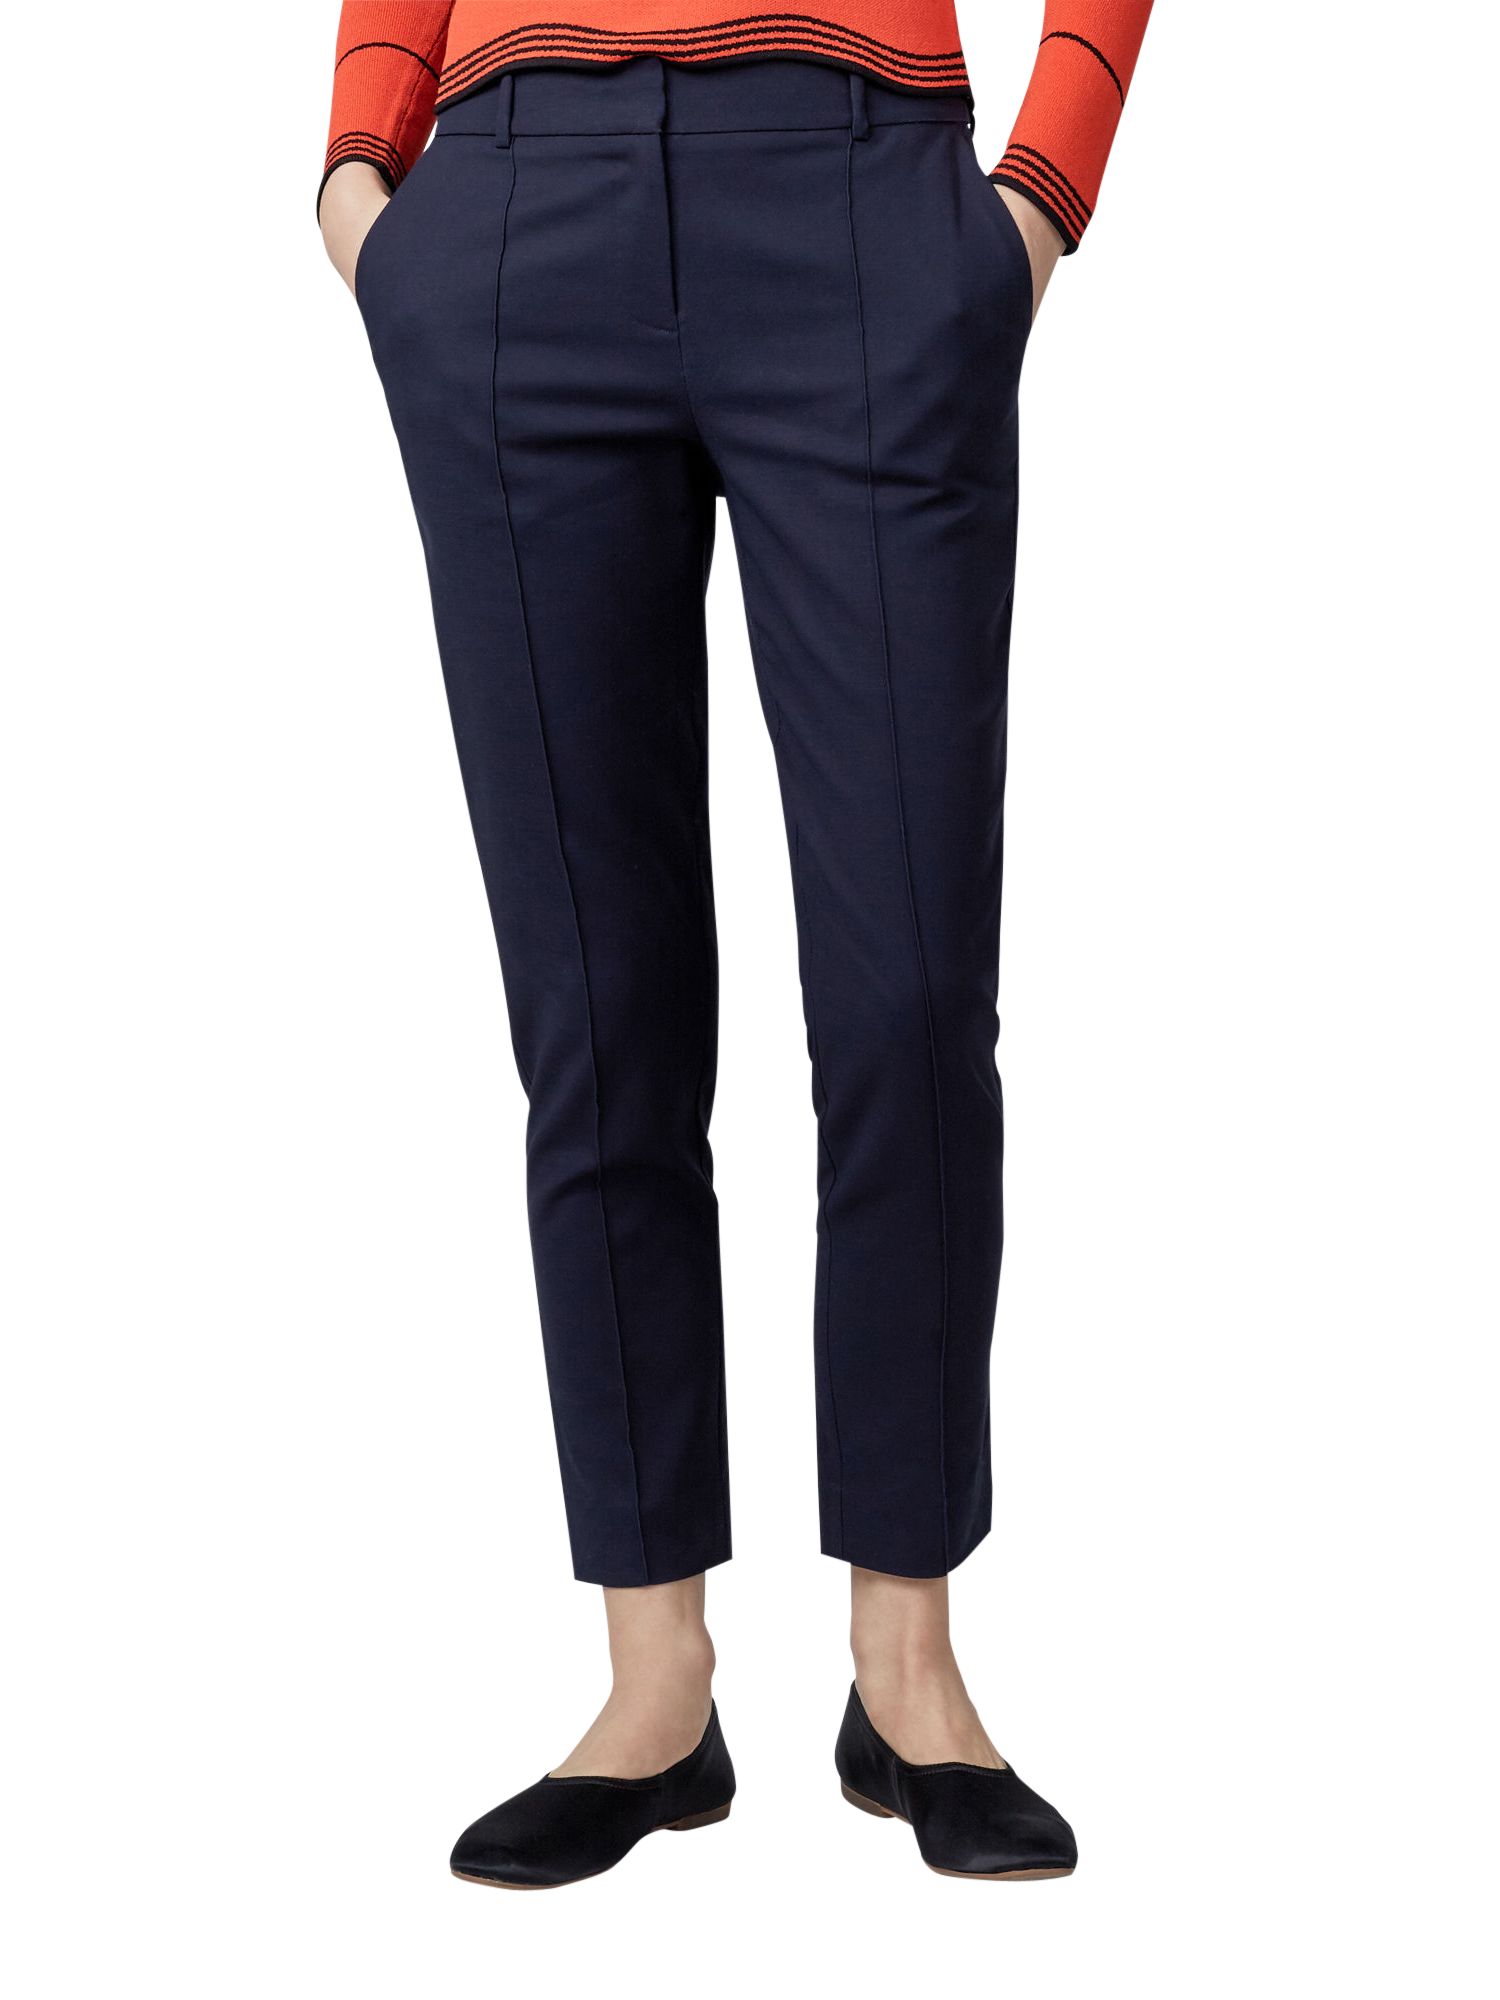 Warehouse Compact Cotton Trousers, Navy, 16